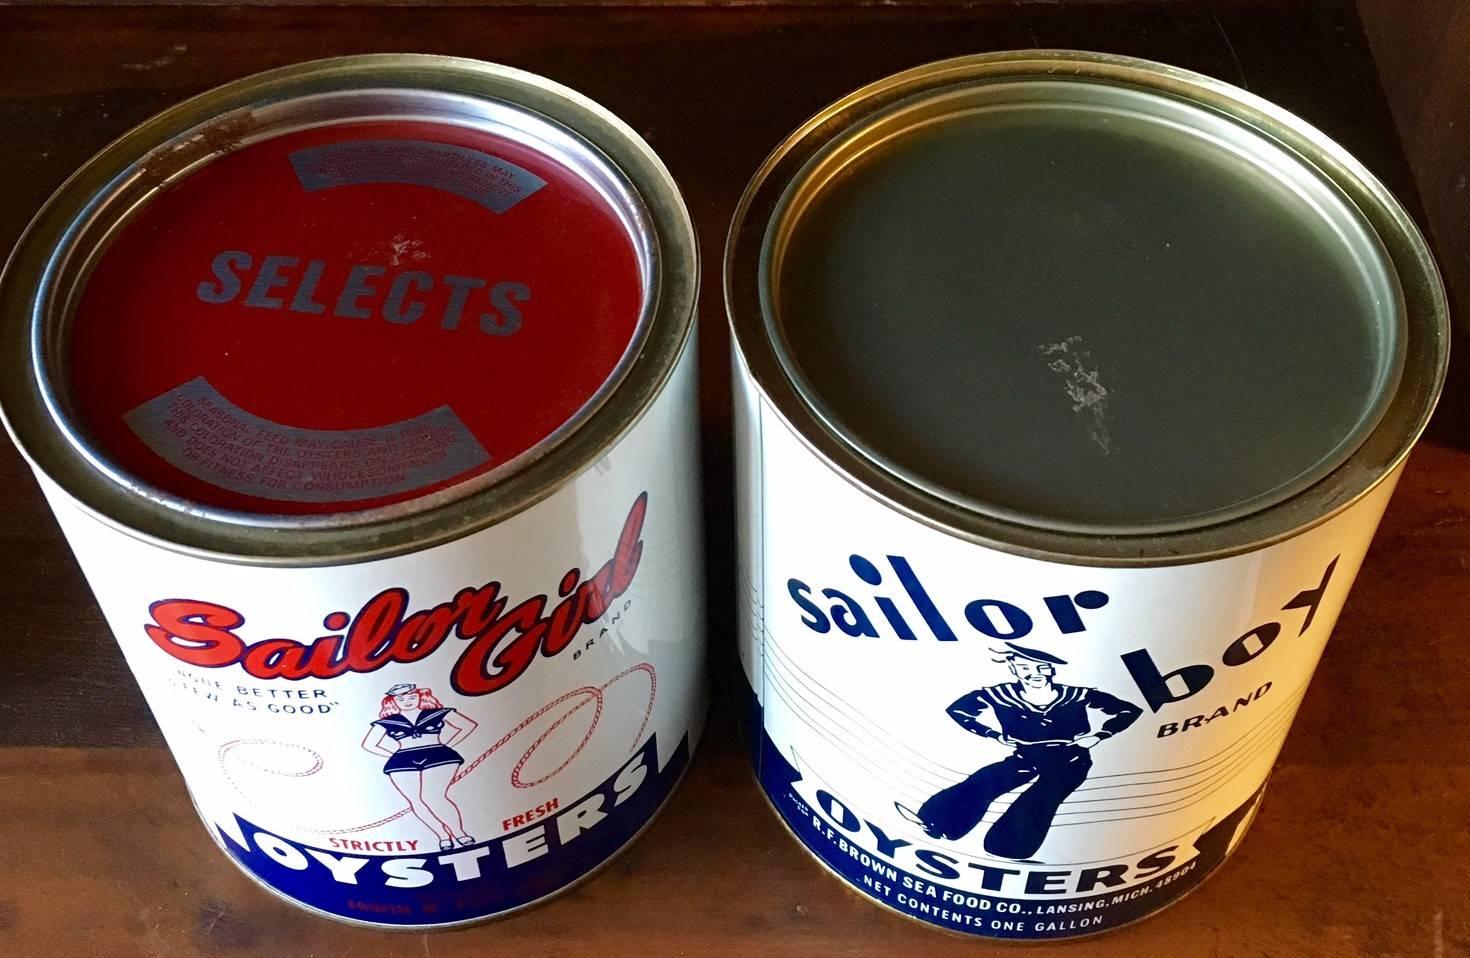 Vintage sailor girl and sailor boy 1 gallon oysters tins. Sailor girl oyster tin held Maryland oysters packed for a Chicago label, circa 1970. Sailor boy oyster tin also packed for a Michigan label, circa 1970.
 